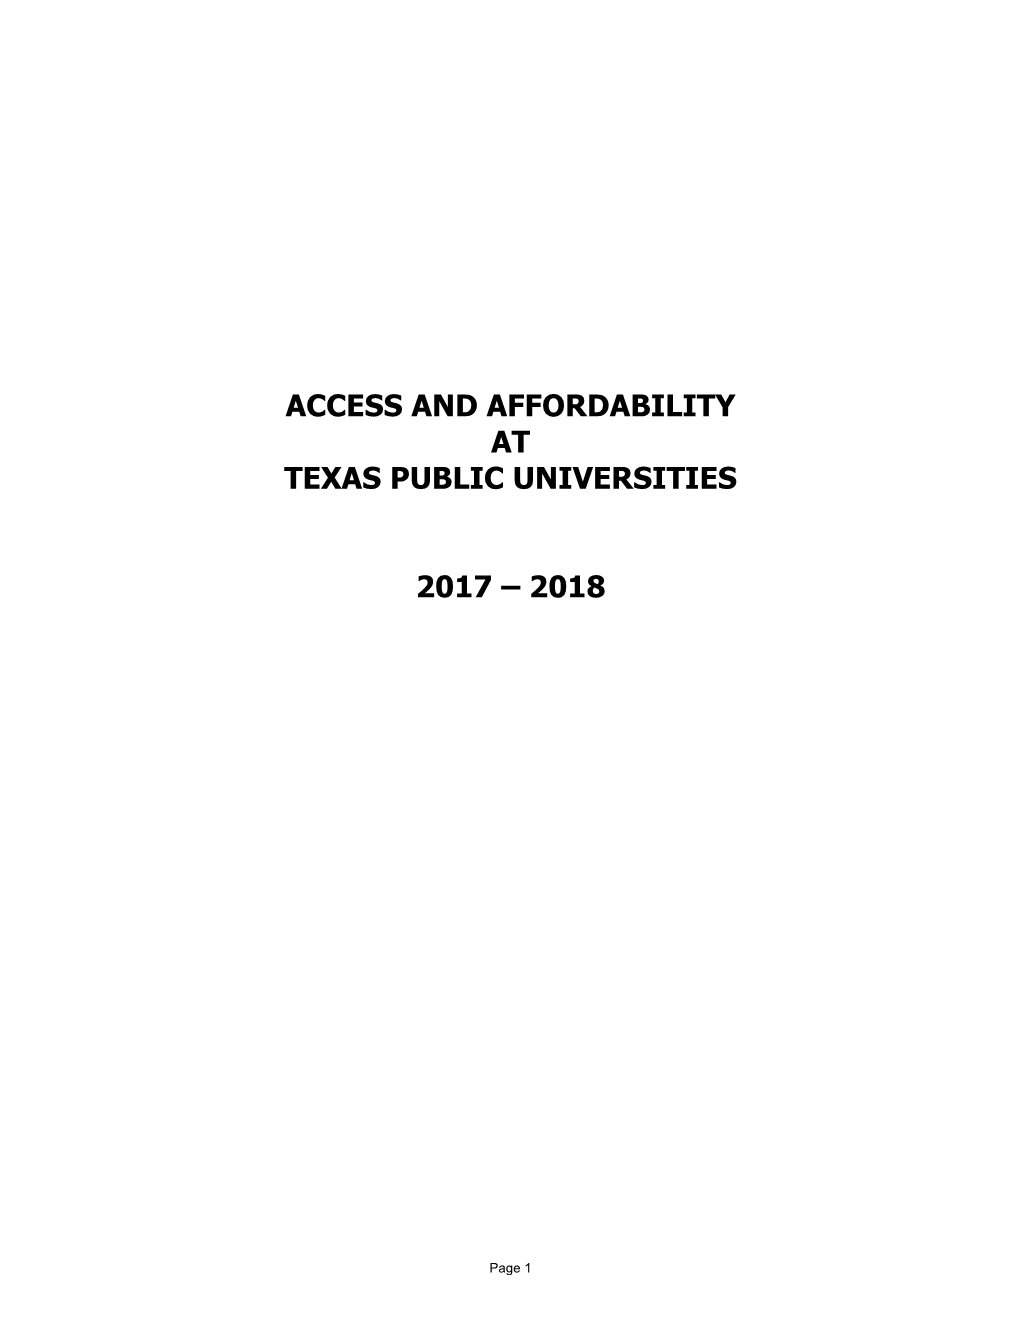 Access and Affordability at Texas Public Universities 2017 – 2018